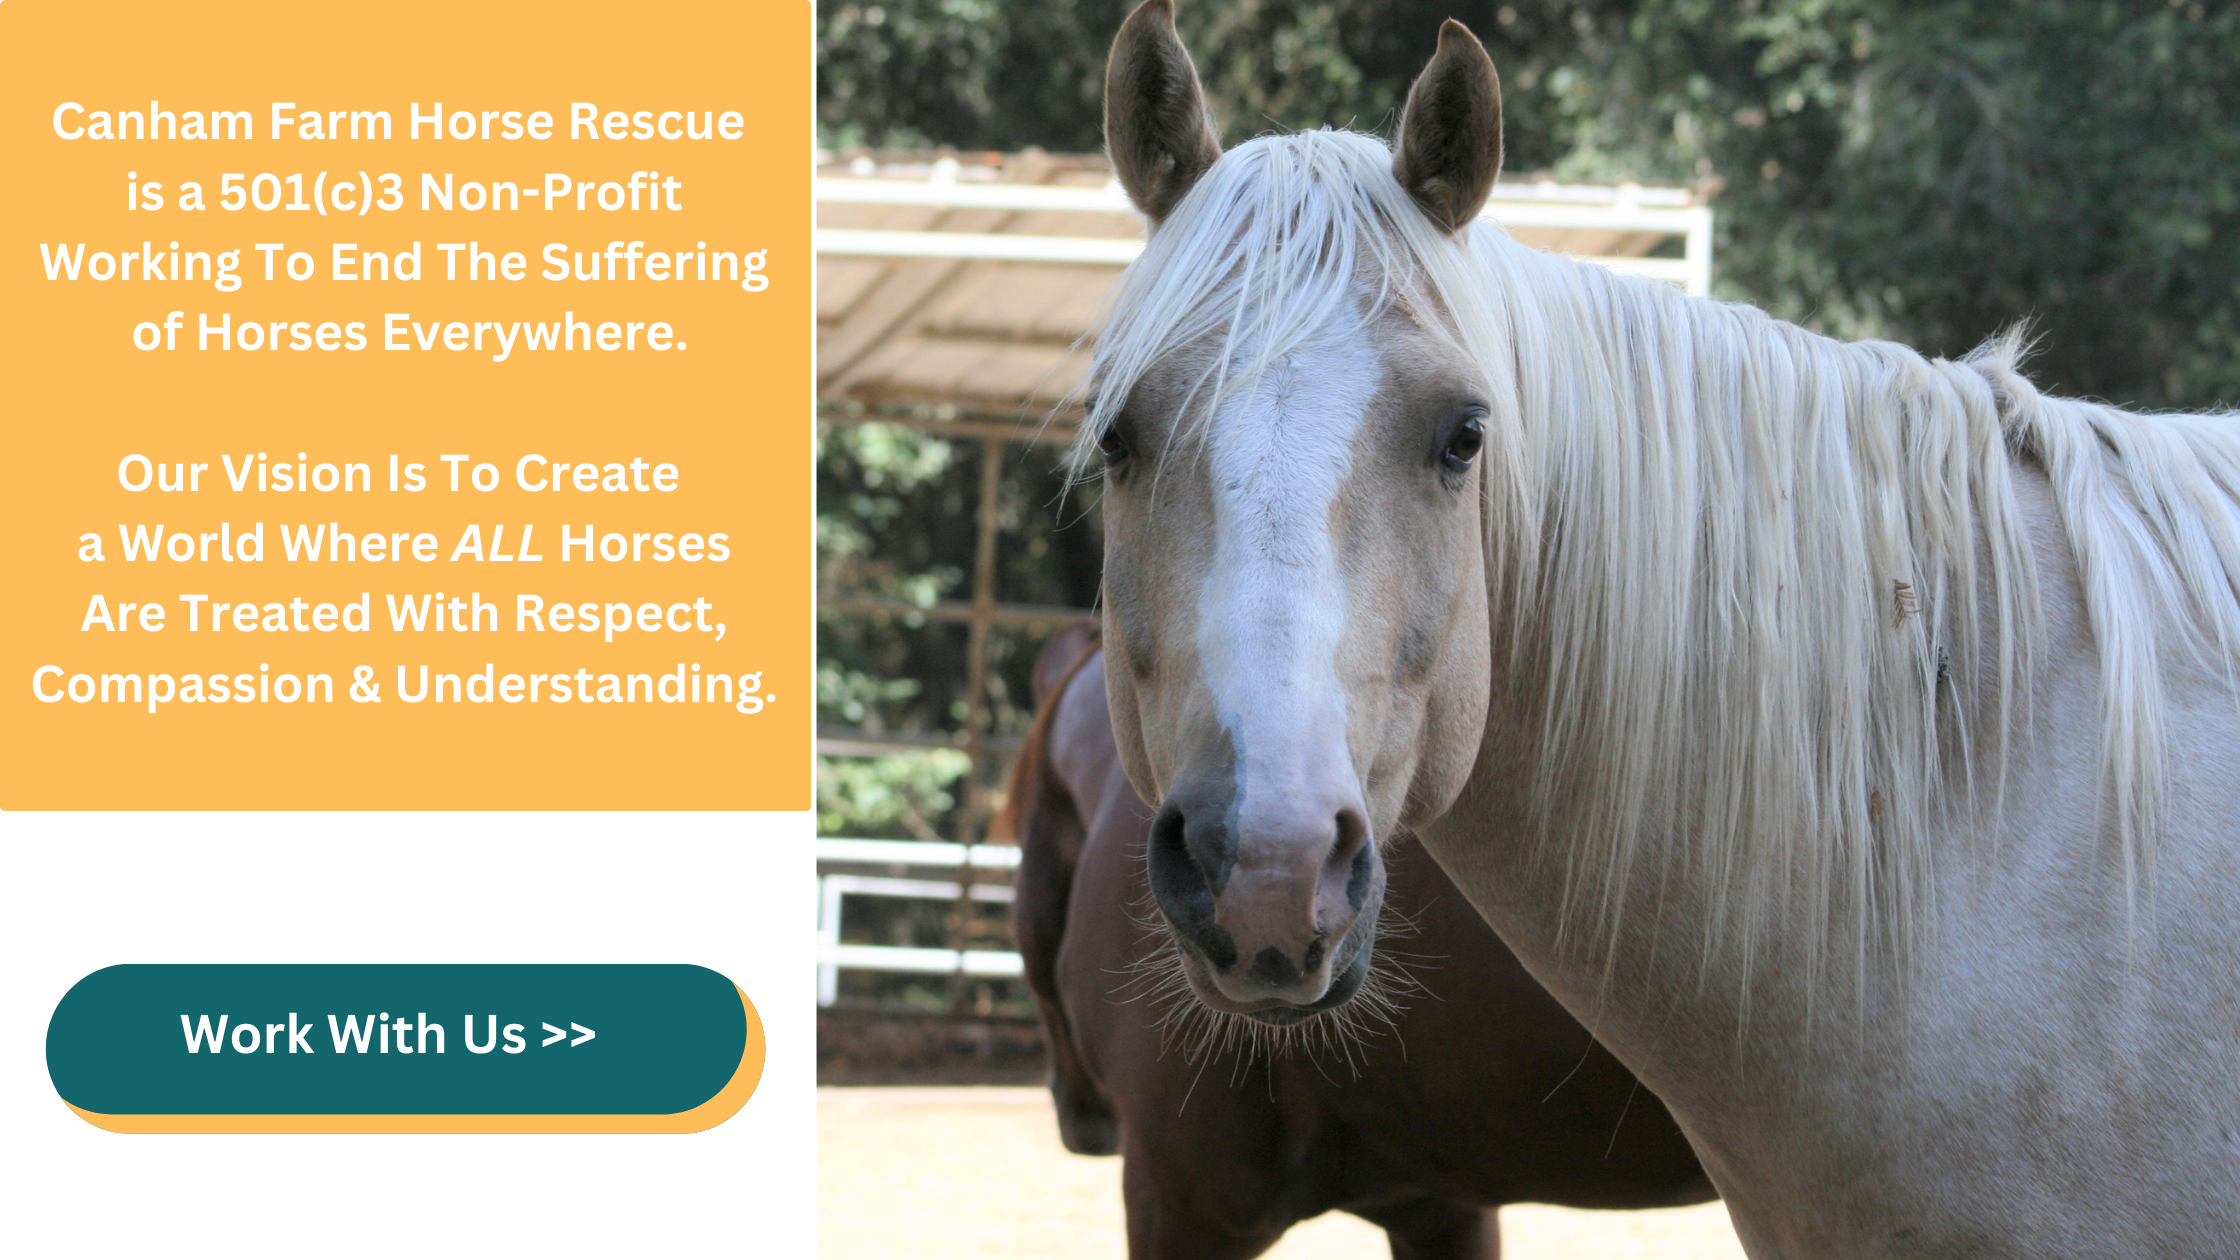 Canham Farm Horse Rescue is a 501(c)3 Non-Profit Working To End The Suffering of Horses Everywhere. Our Vision Is To Create a World Where ALL Horses Are Treated With Respect, Compassion and Understanding